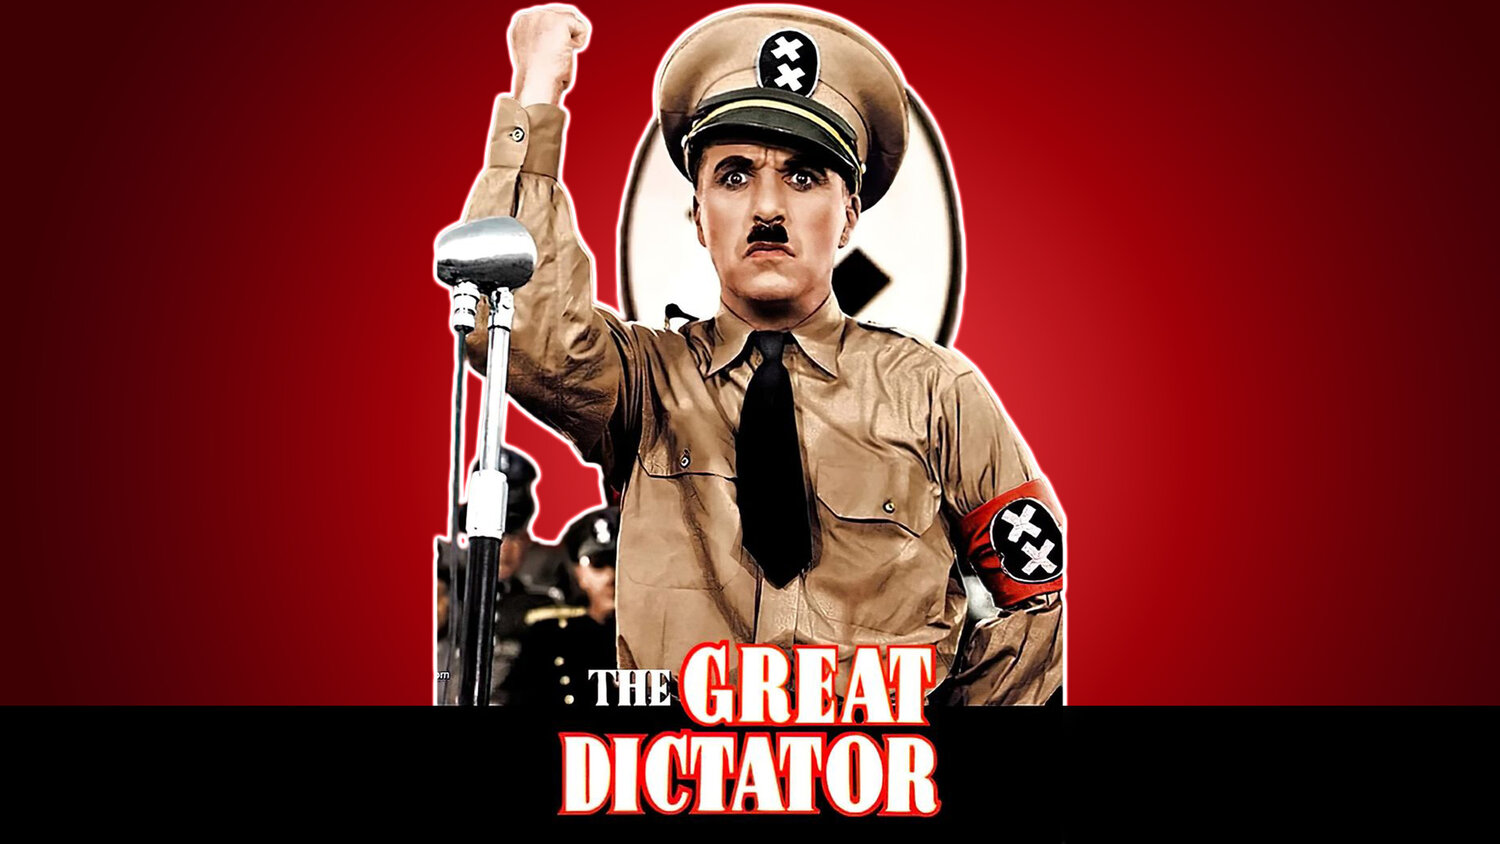 43 Facts about the movie The Great Dictator - Facts.net